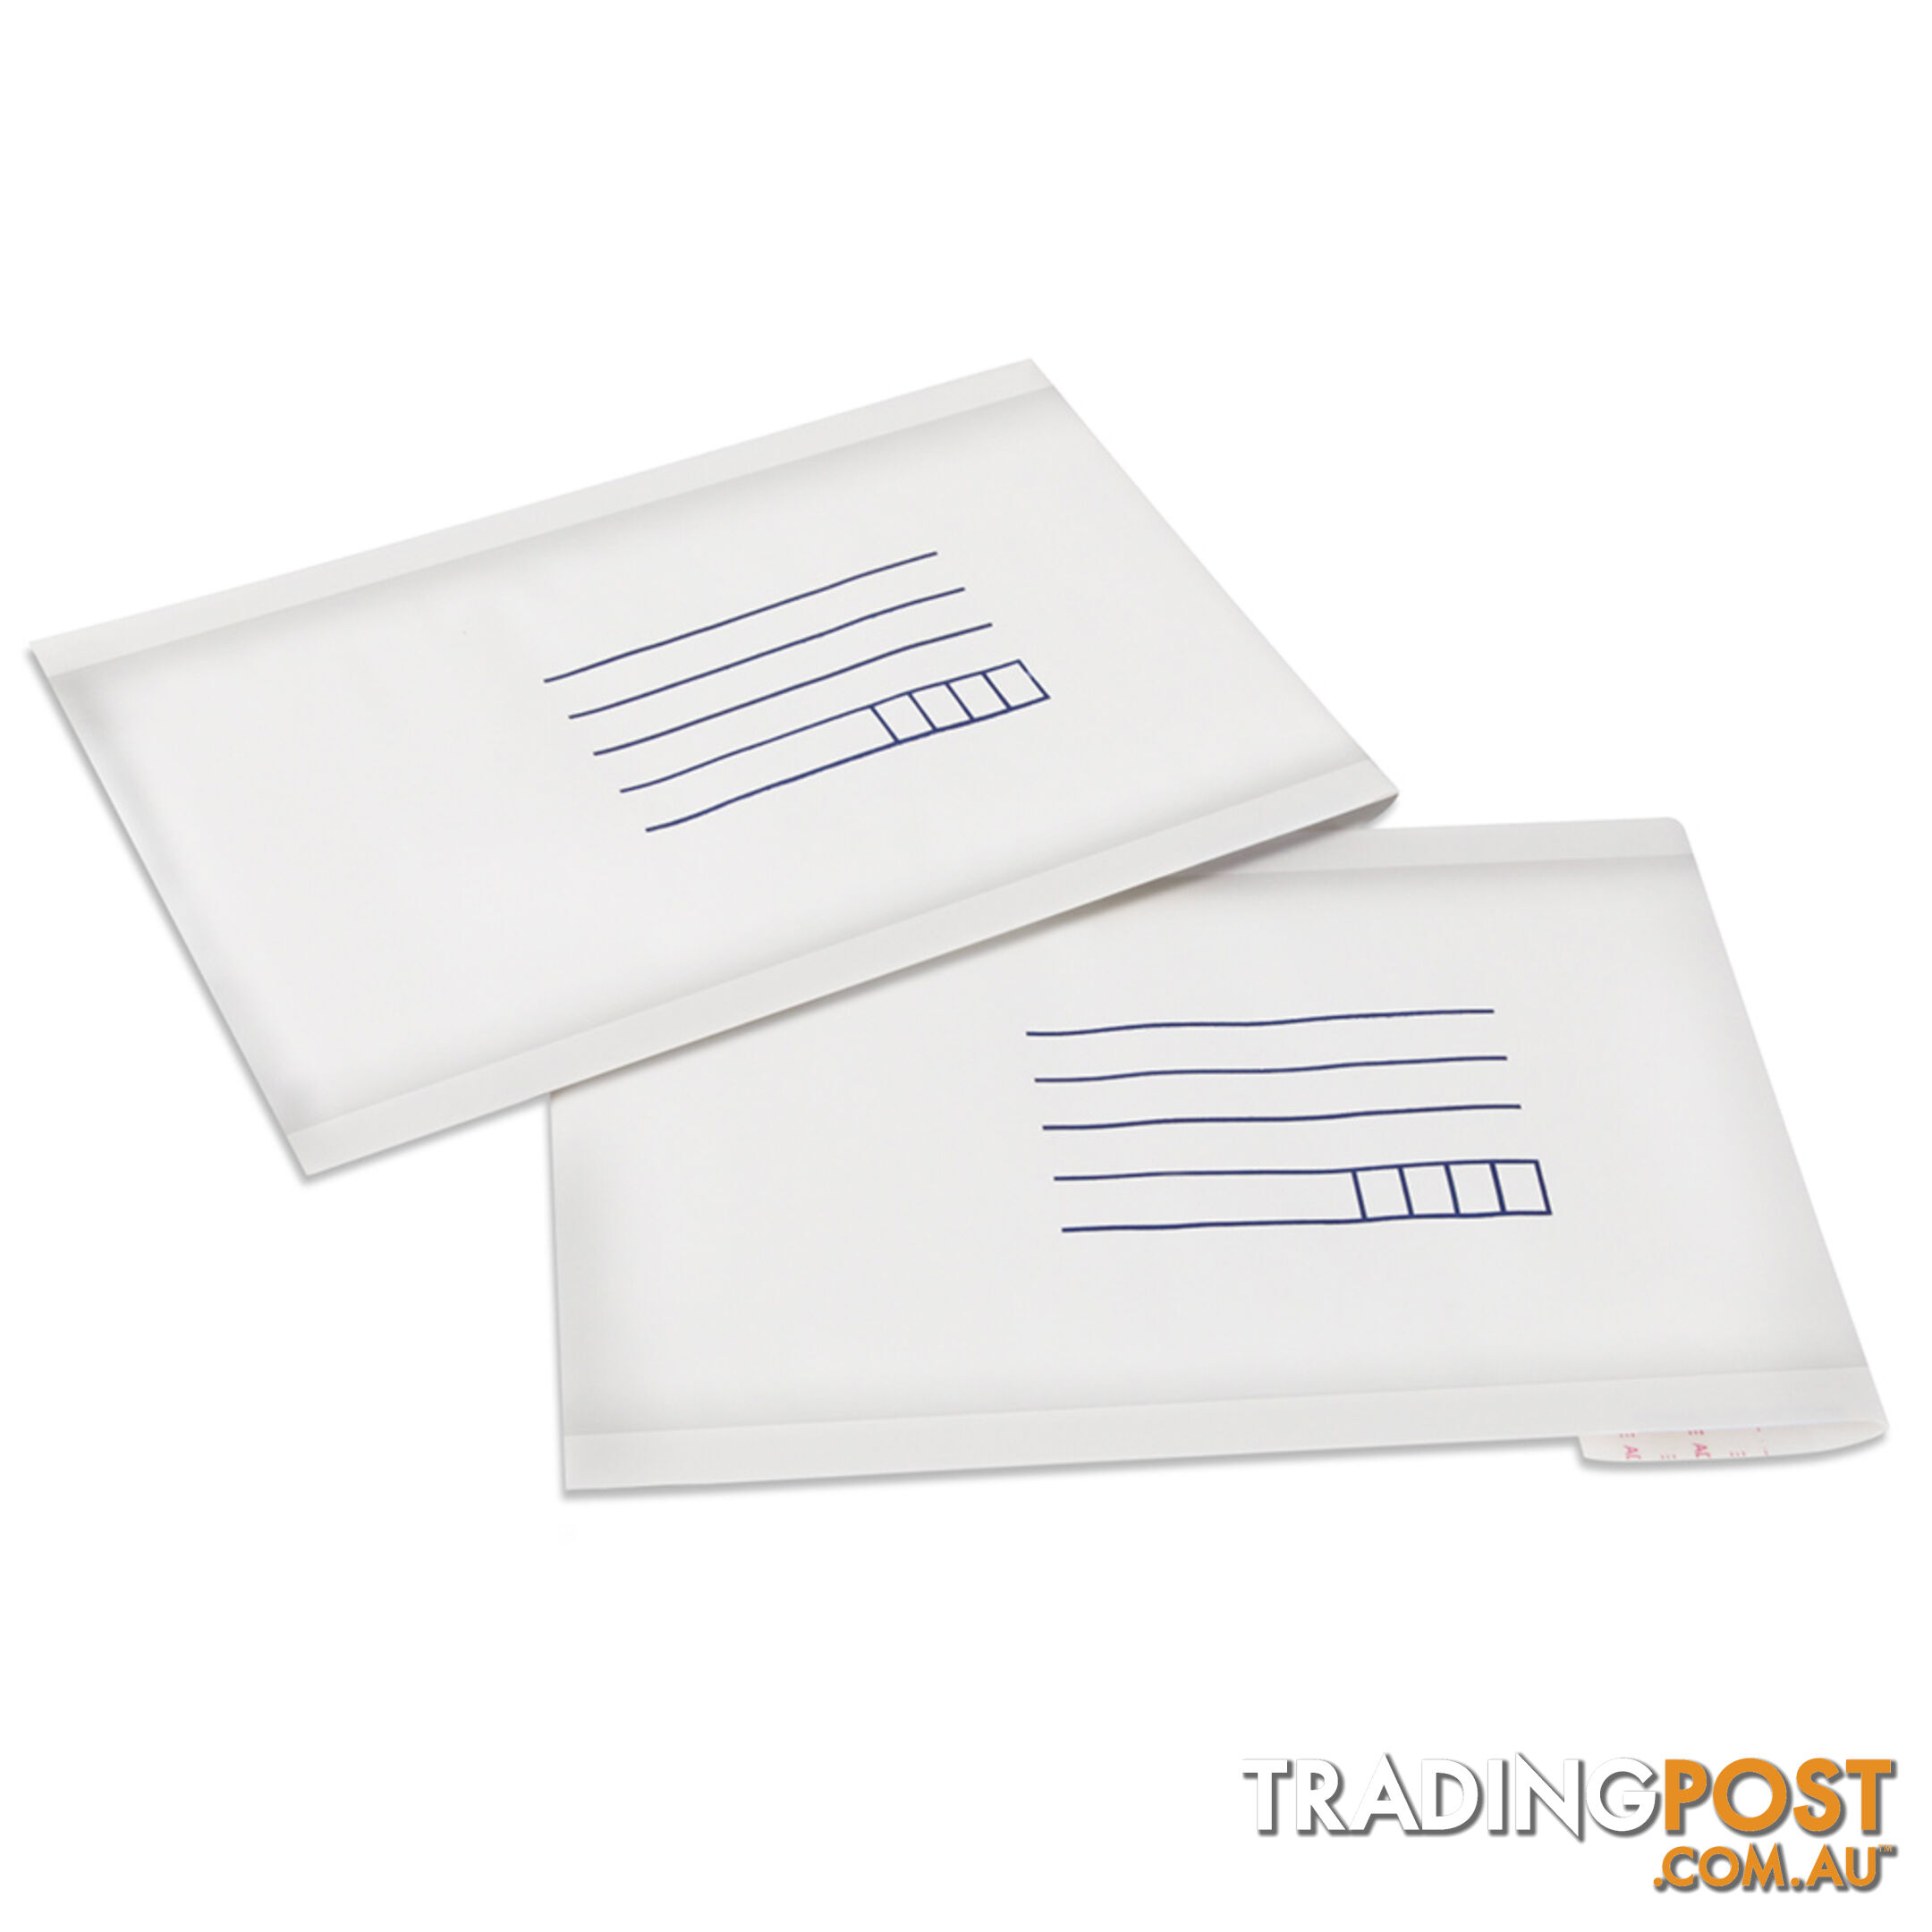 Set of 200 Bubble Padded Mailer Bag - 120mm x 180mm